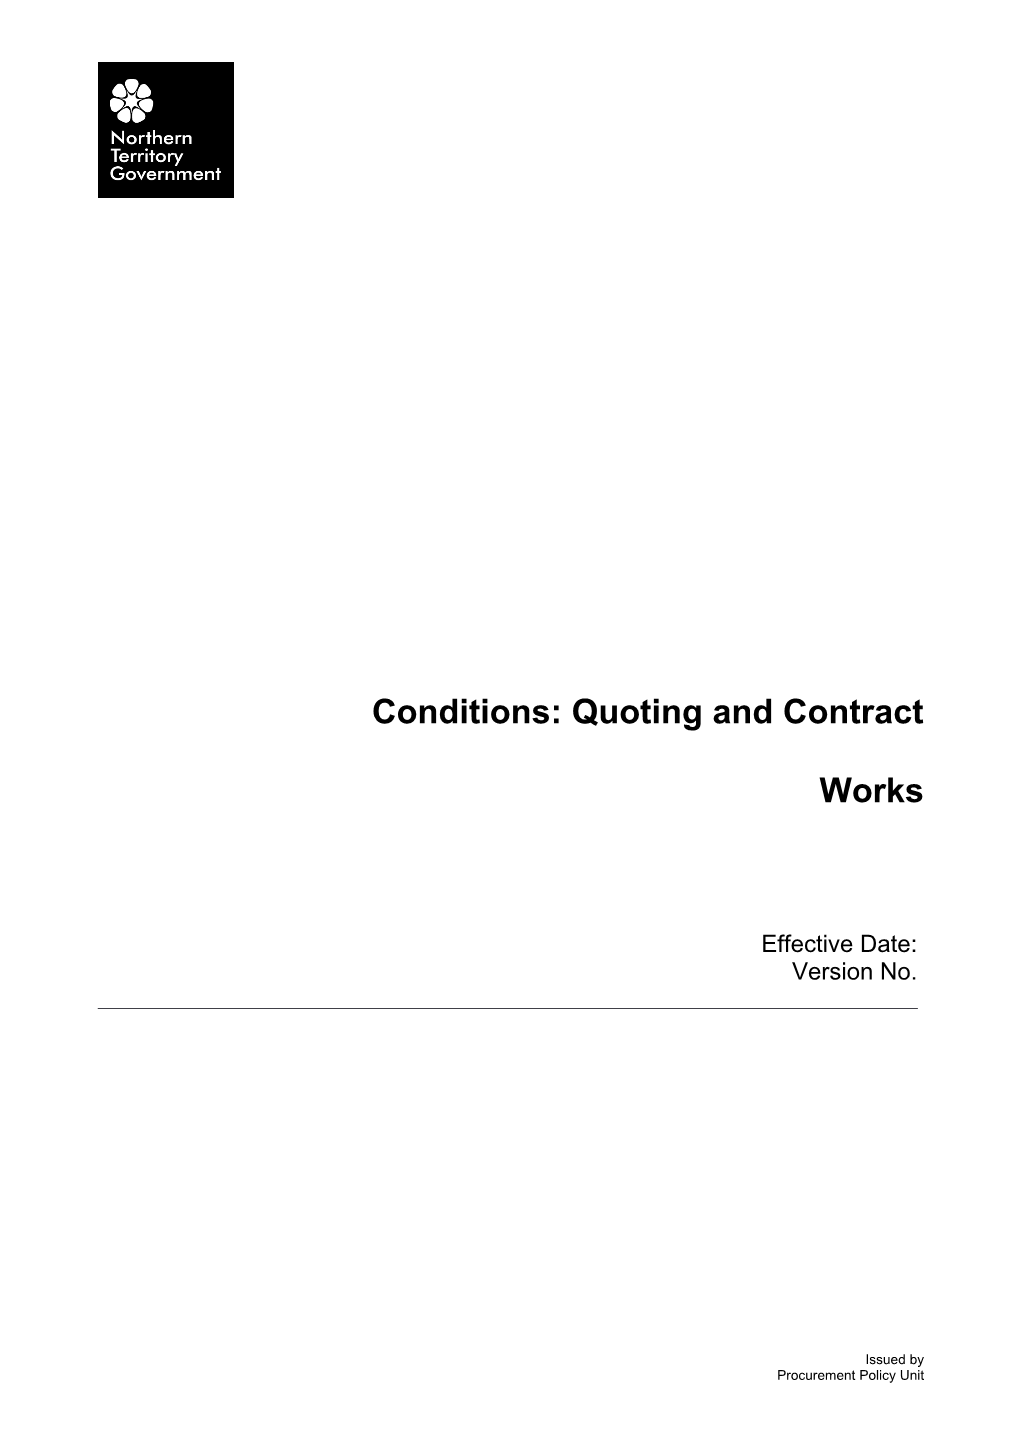 Conditions of Quoting and Contract - V 4.1.01 (November 2010)